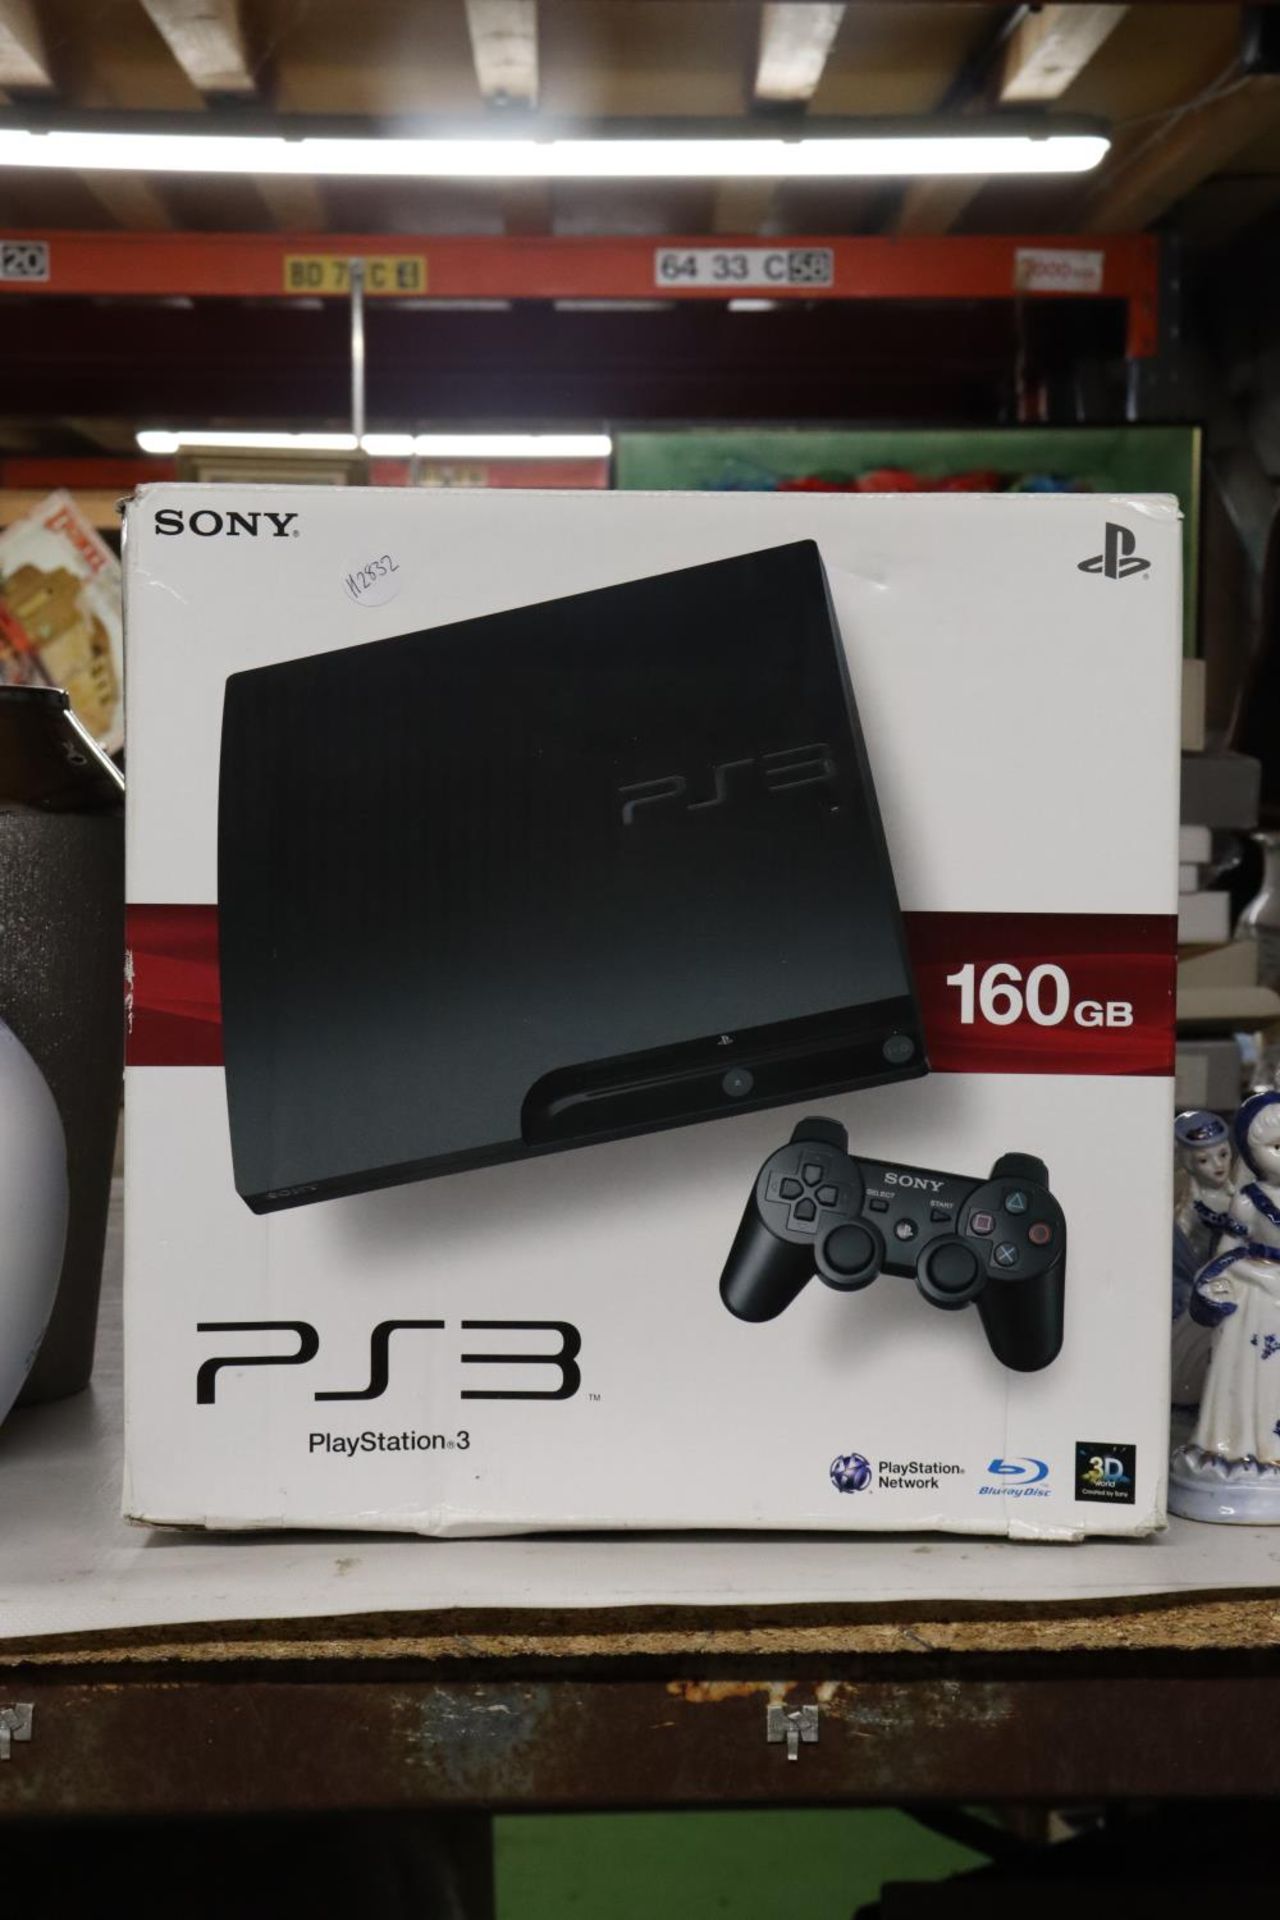 A BOXED PLAYSTATION 3, 160 GB WITH A CONTROLLER AND POWER CABLE